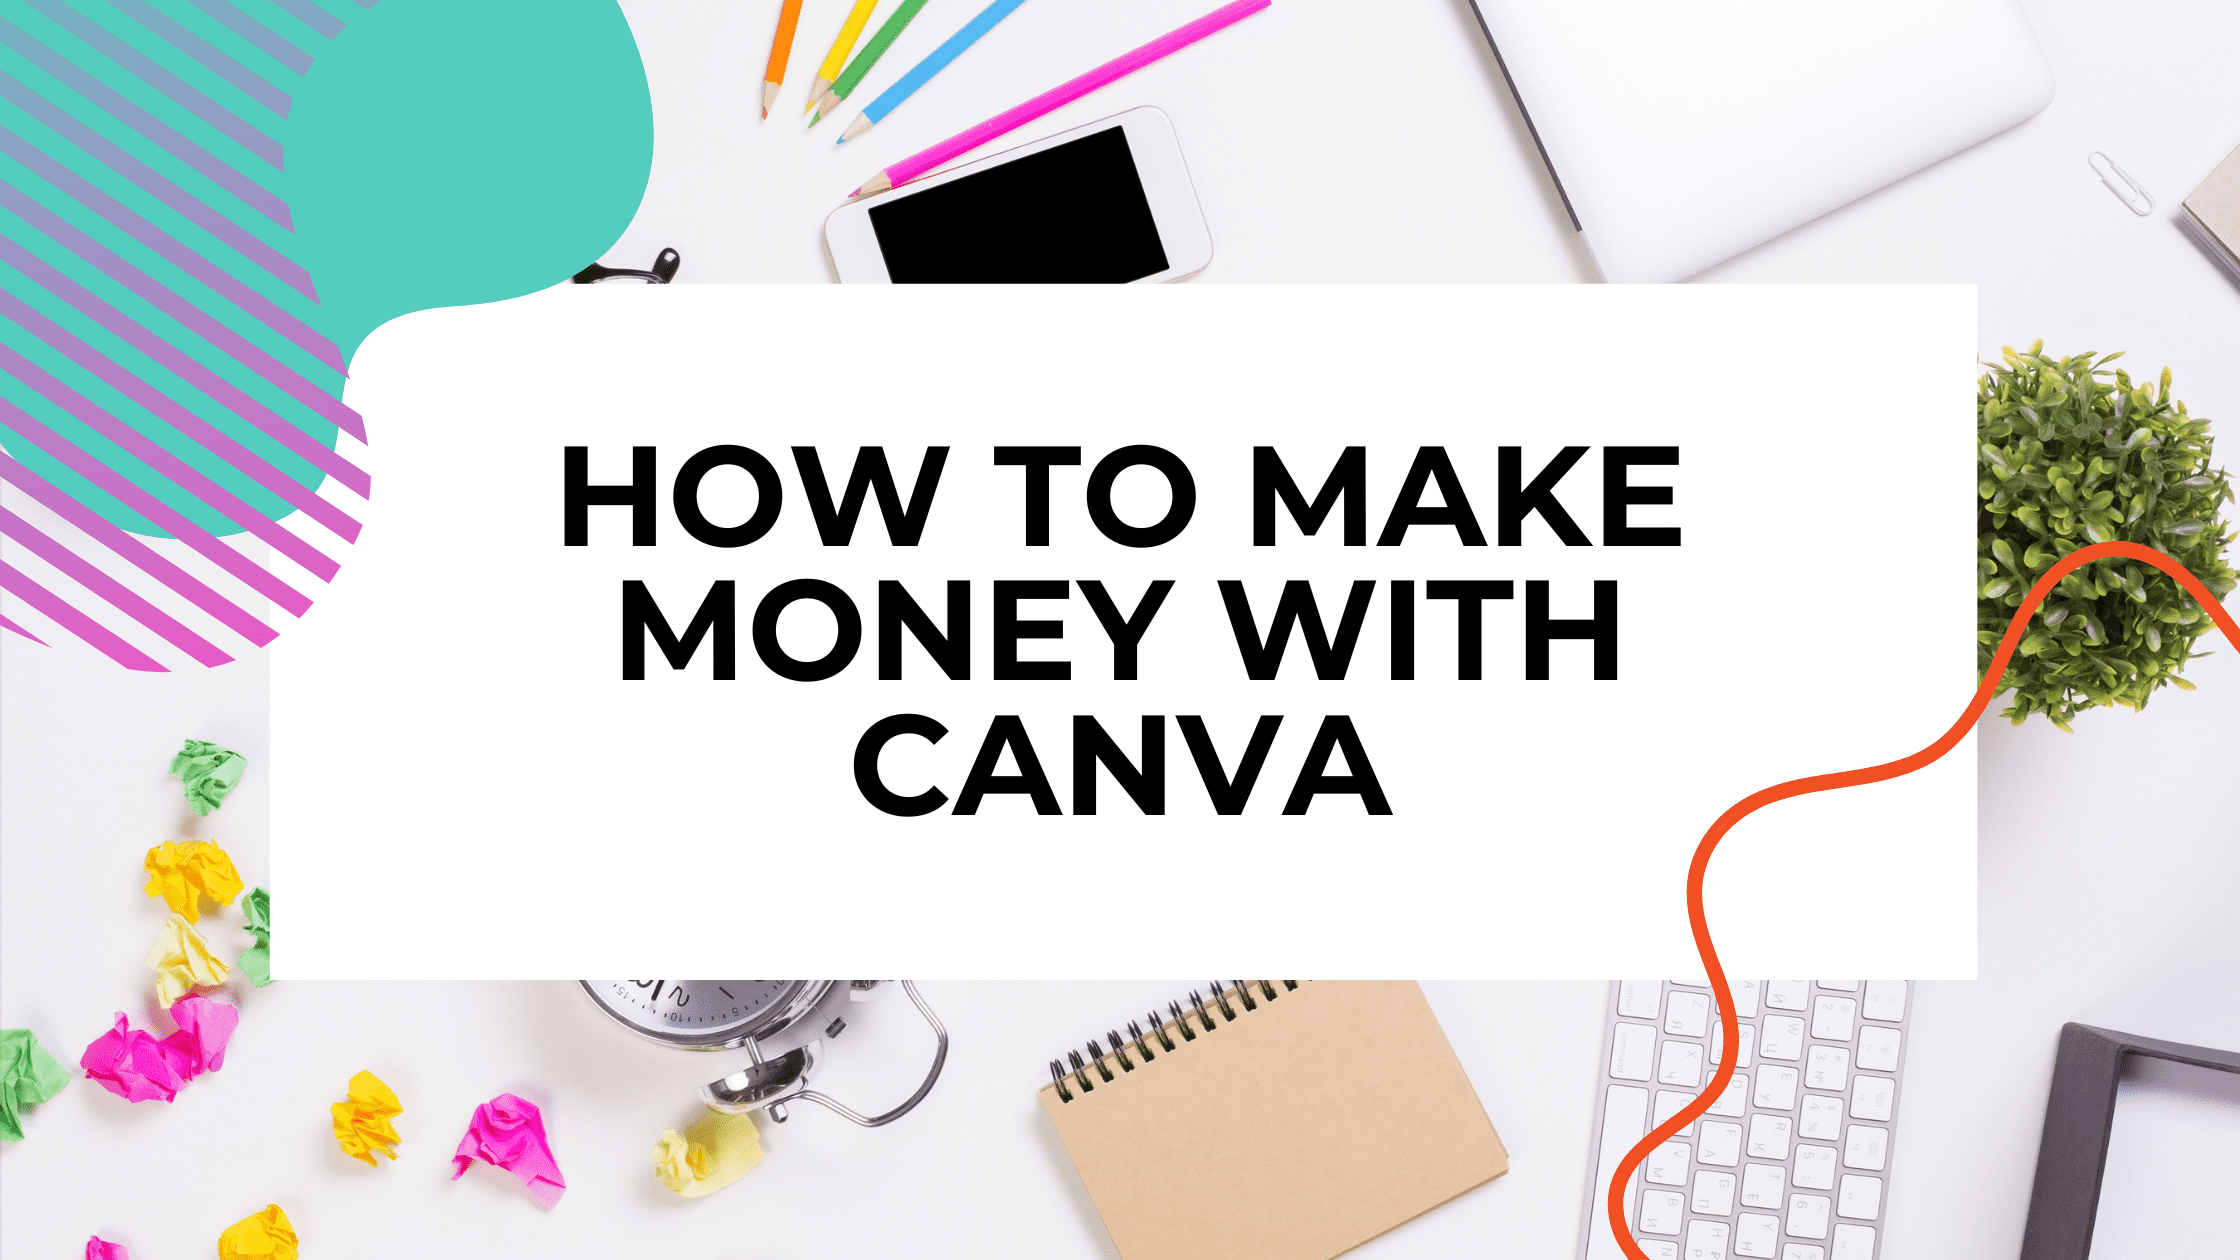 How to Make Money With Canva (21 Ways) From 1k to 10k